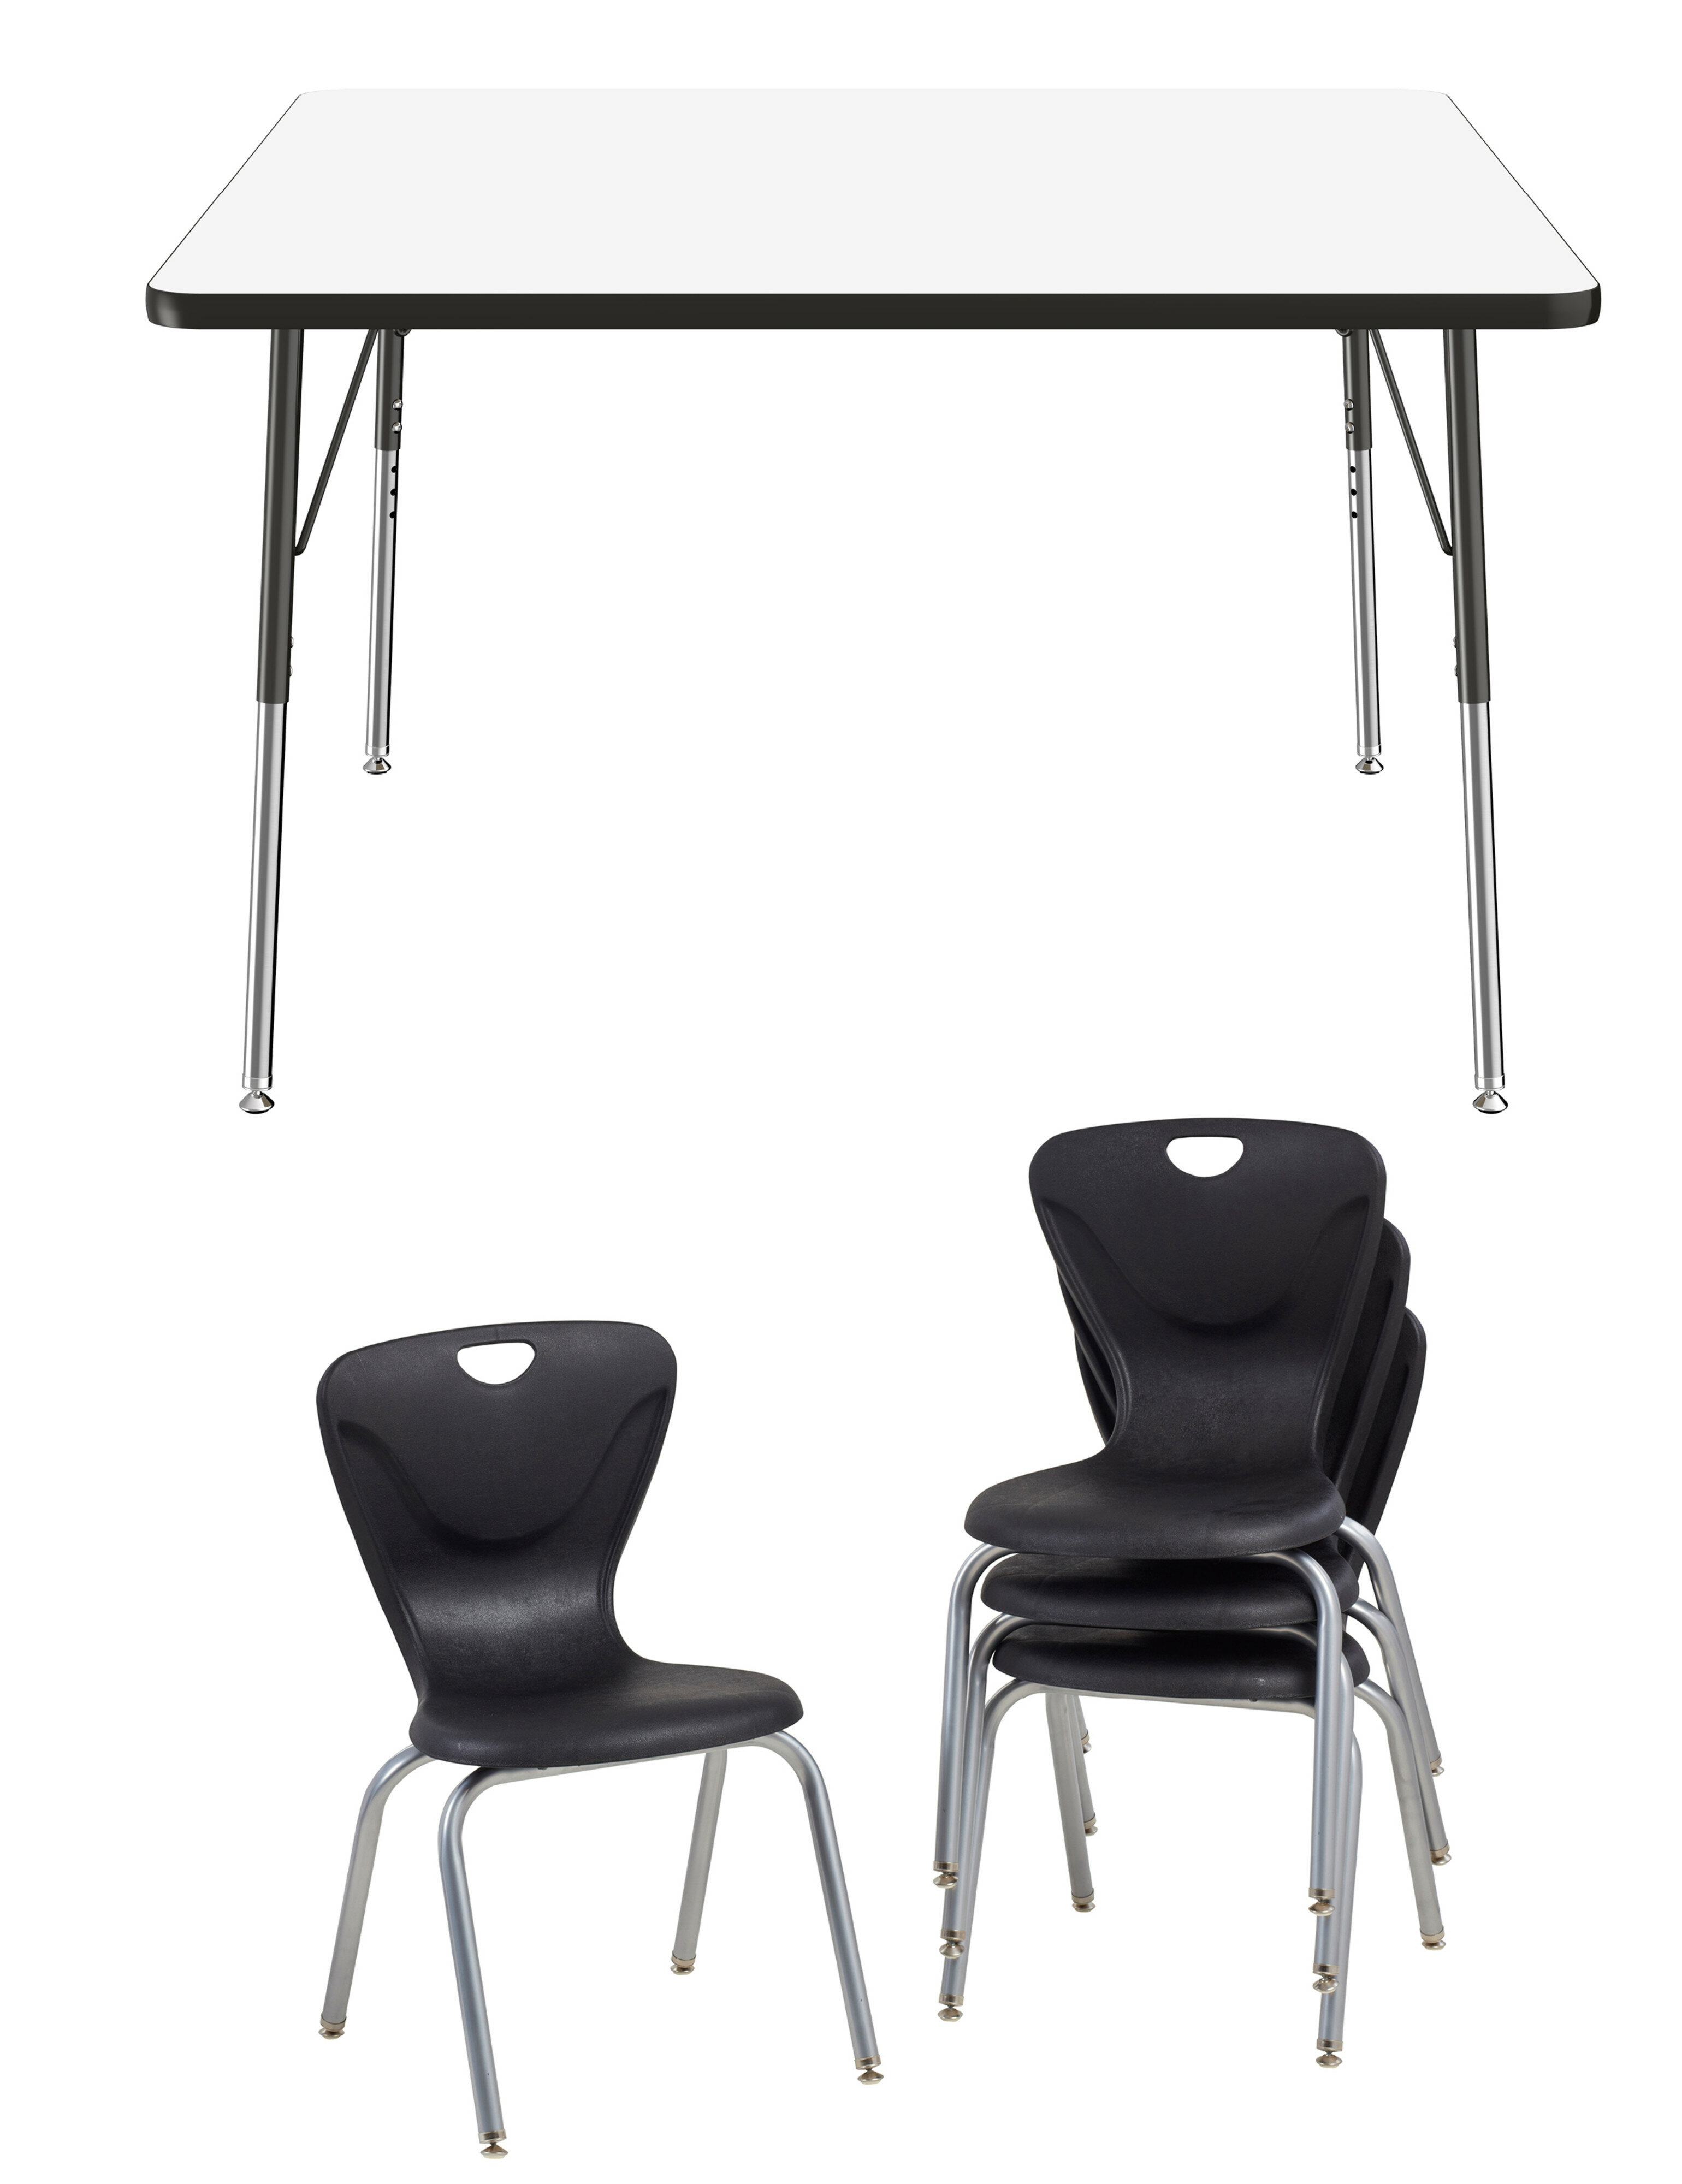 dry erase table and chairs